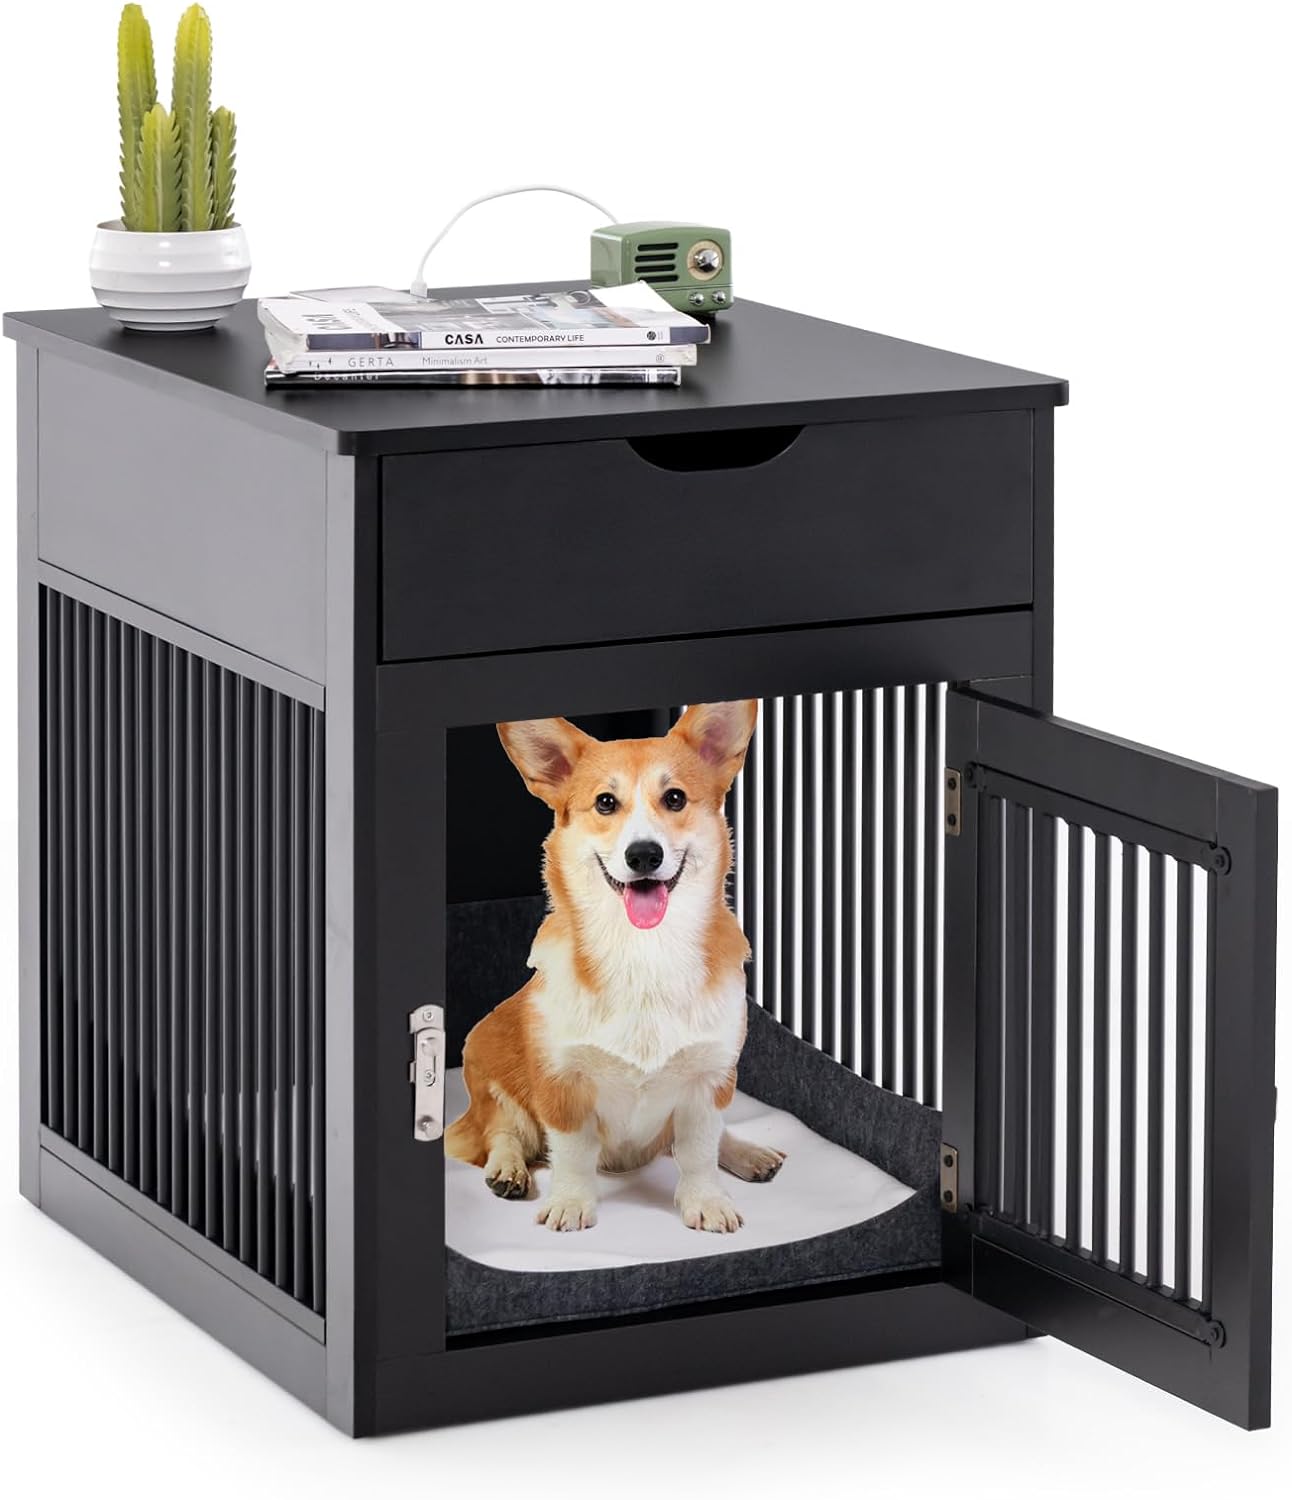 Giantex Dog Crate Furniture, Dog Kennel End Table with Chew-Proof Metal Fence, Lockable Door